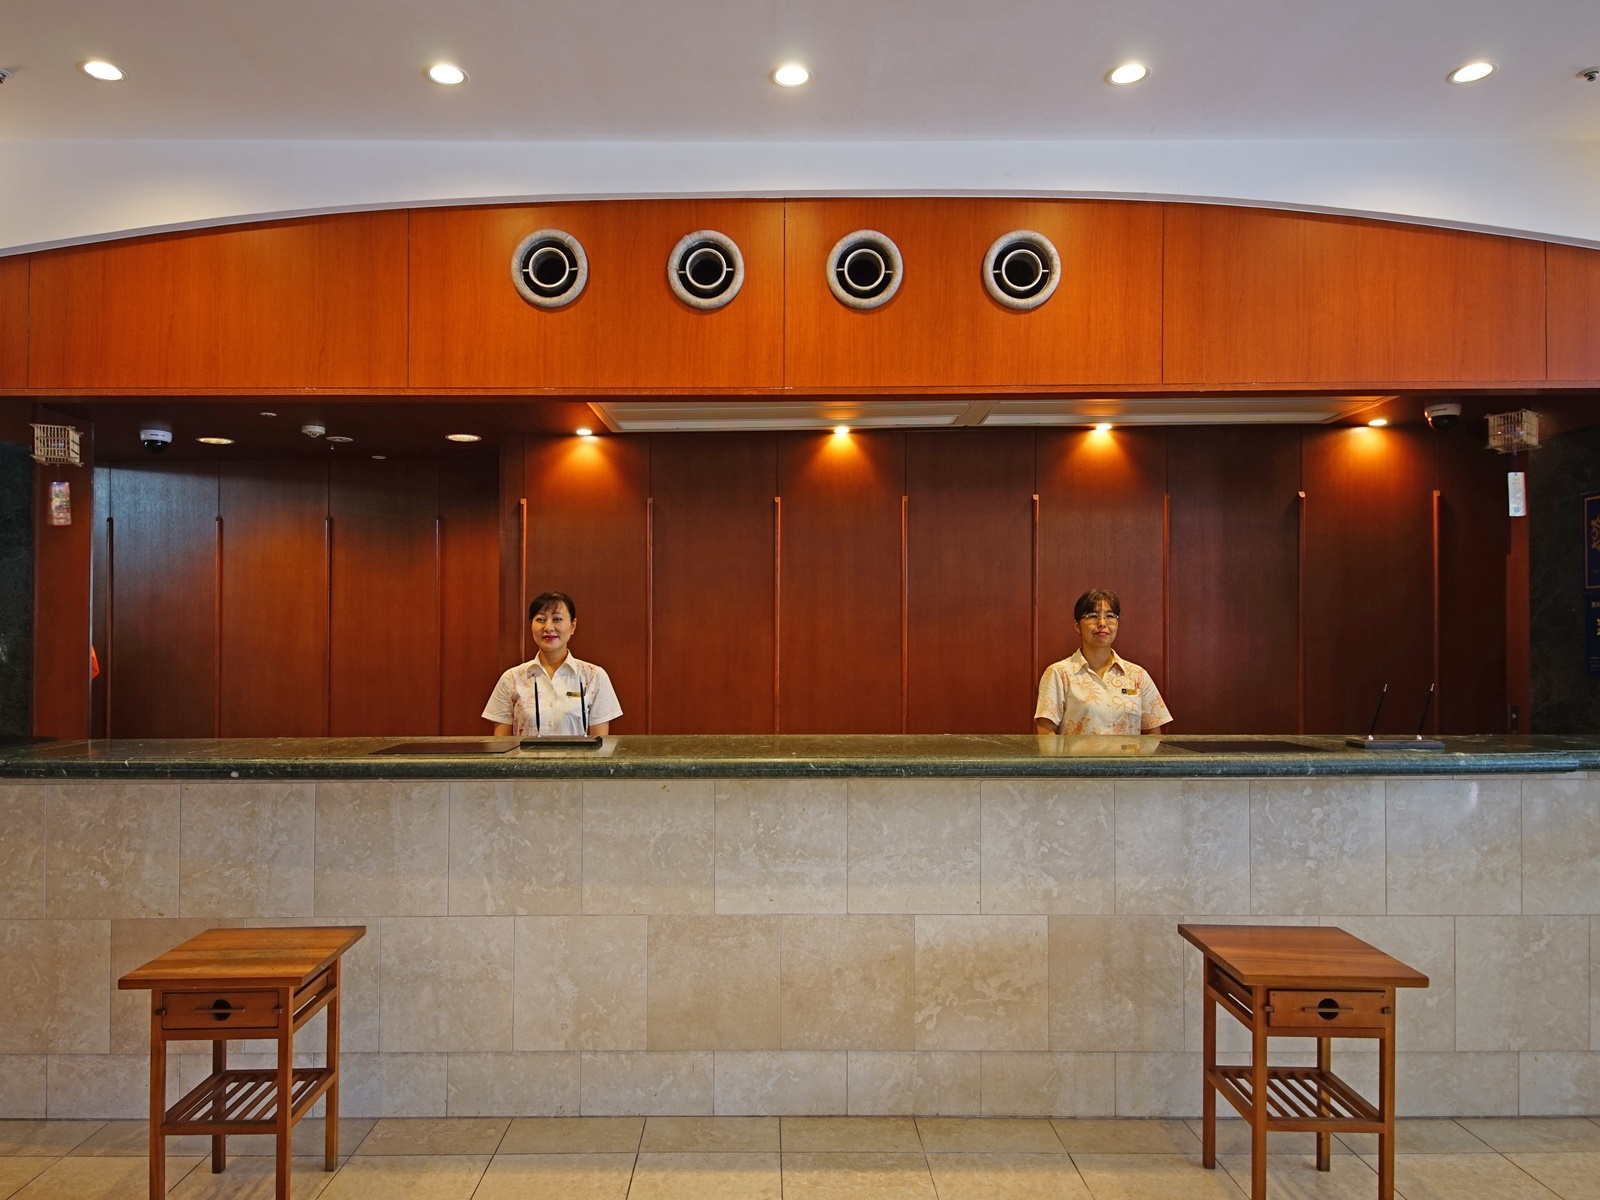 The front desk (image)